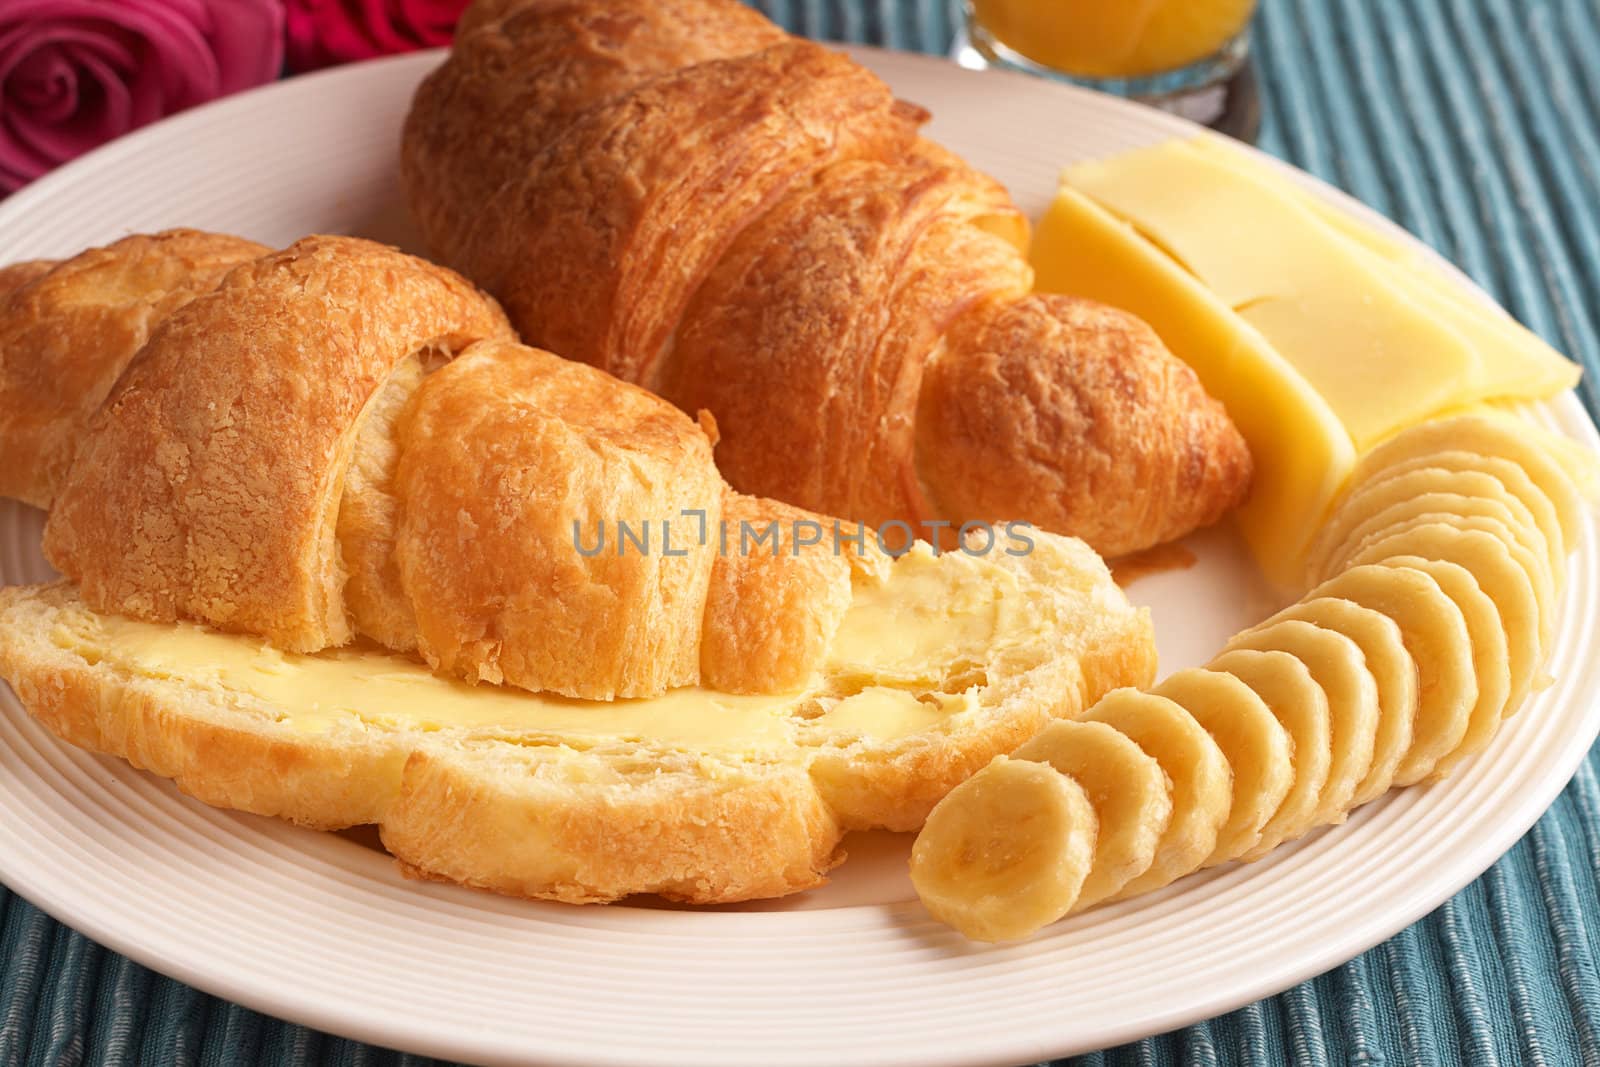 Breakfast plate with freshly baked croissants with butter, cheese and sliced bananas